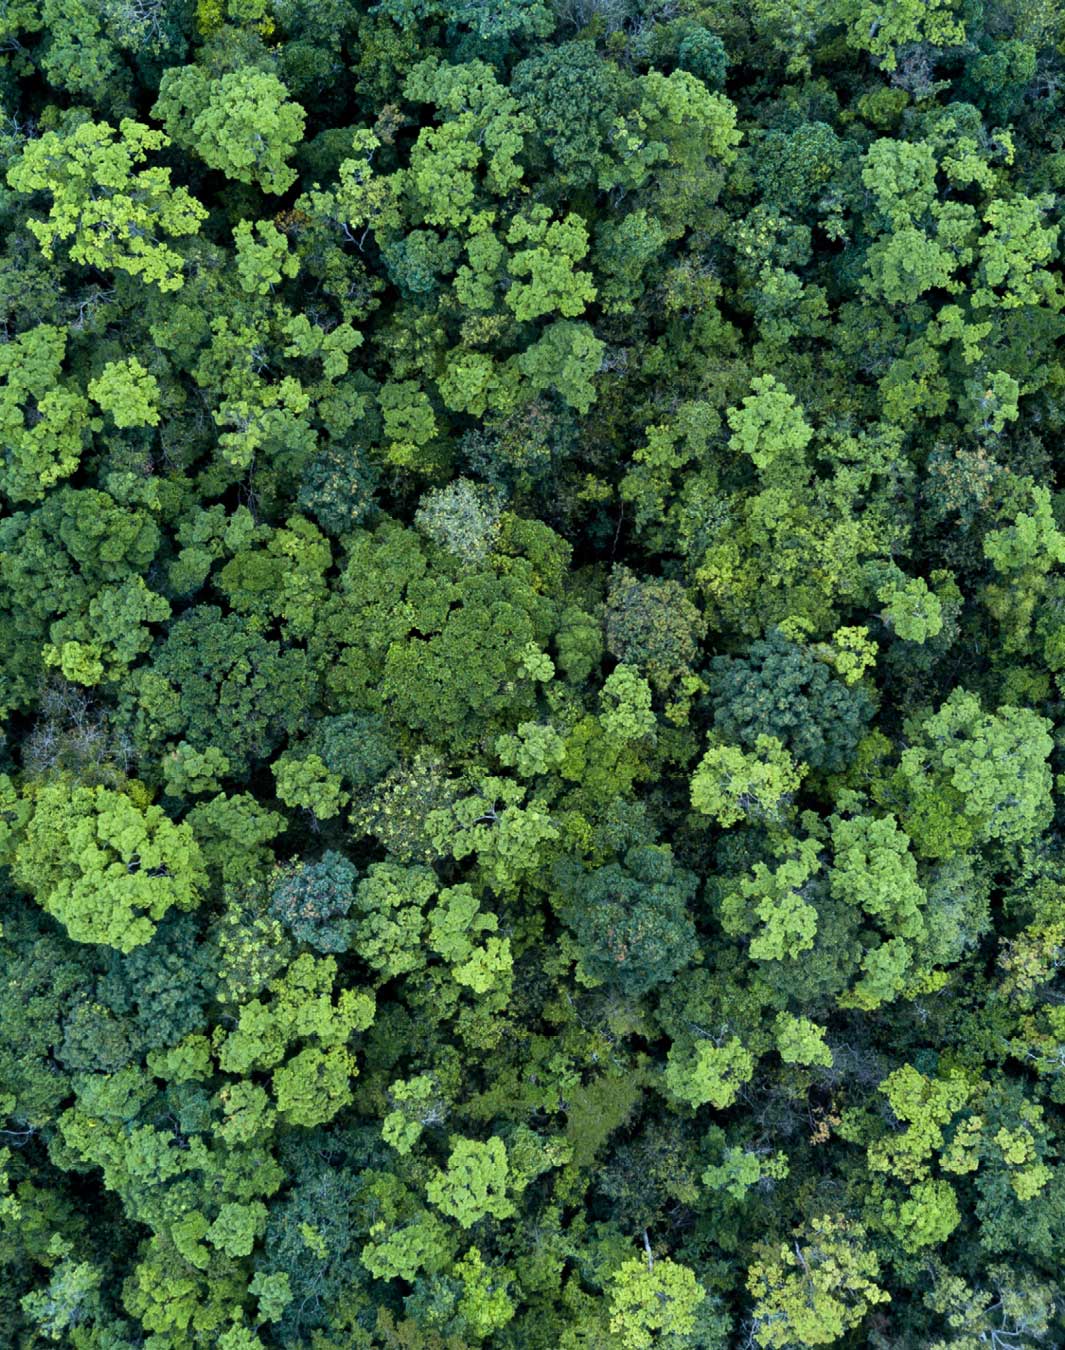 A forest canopy.